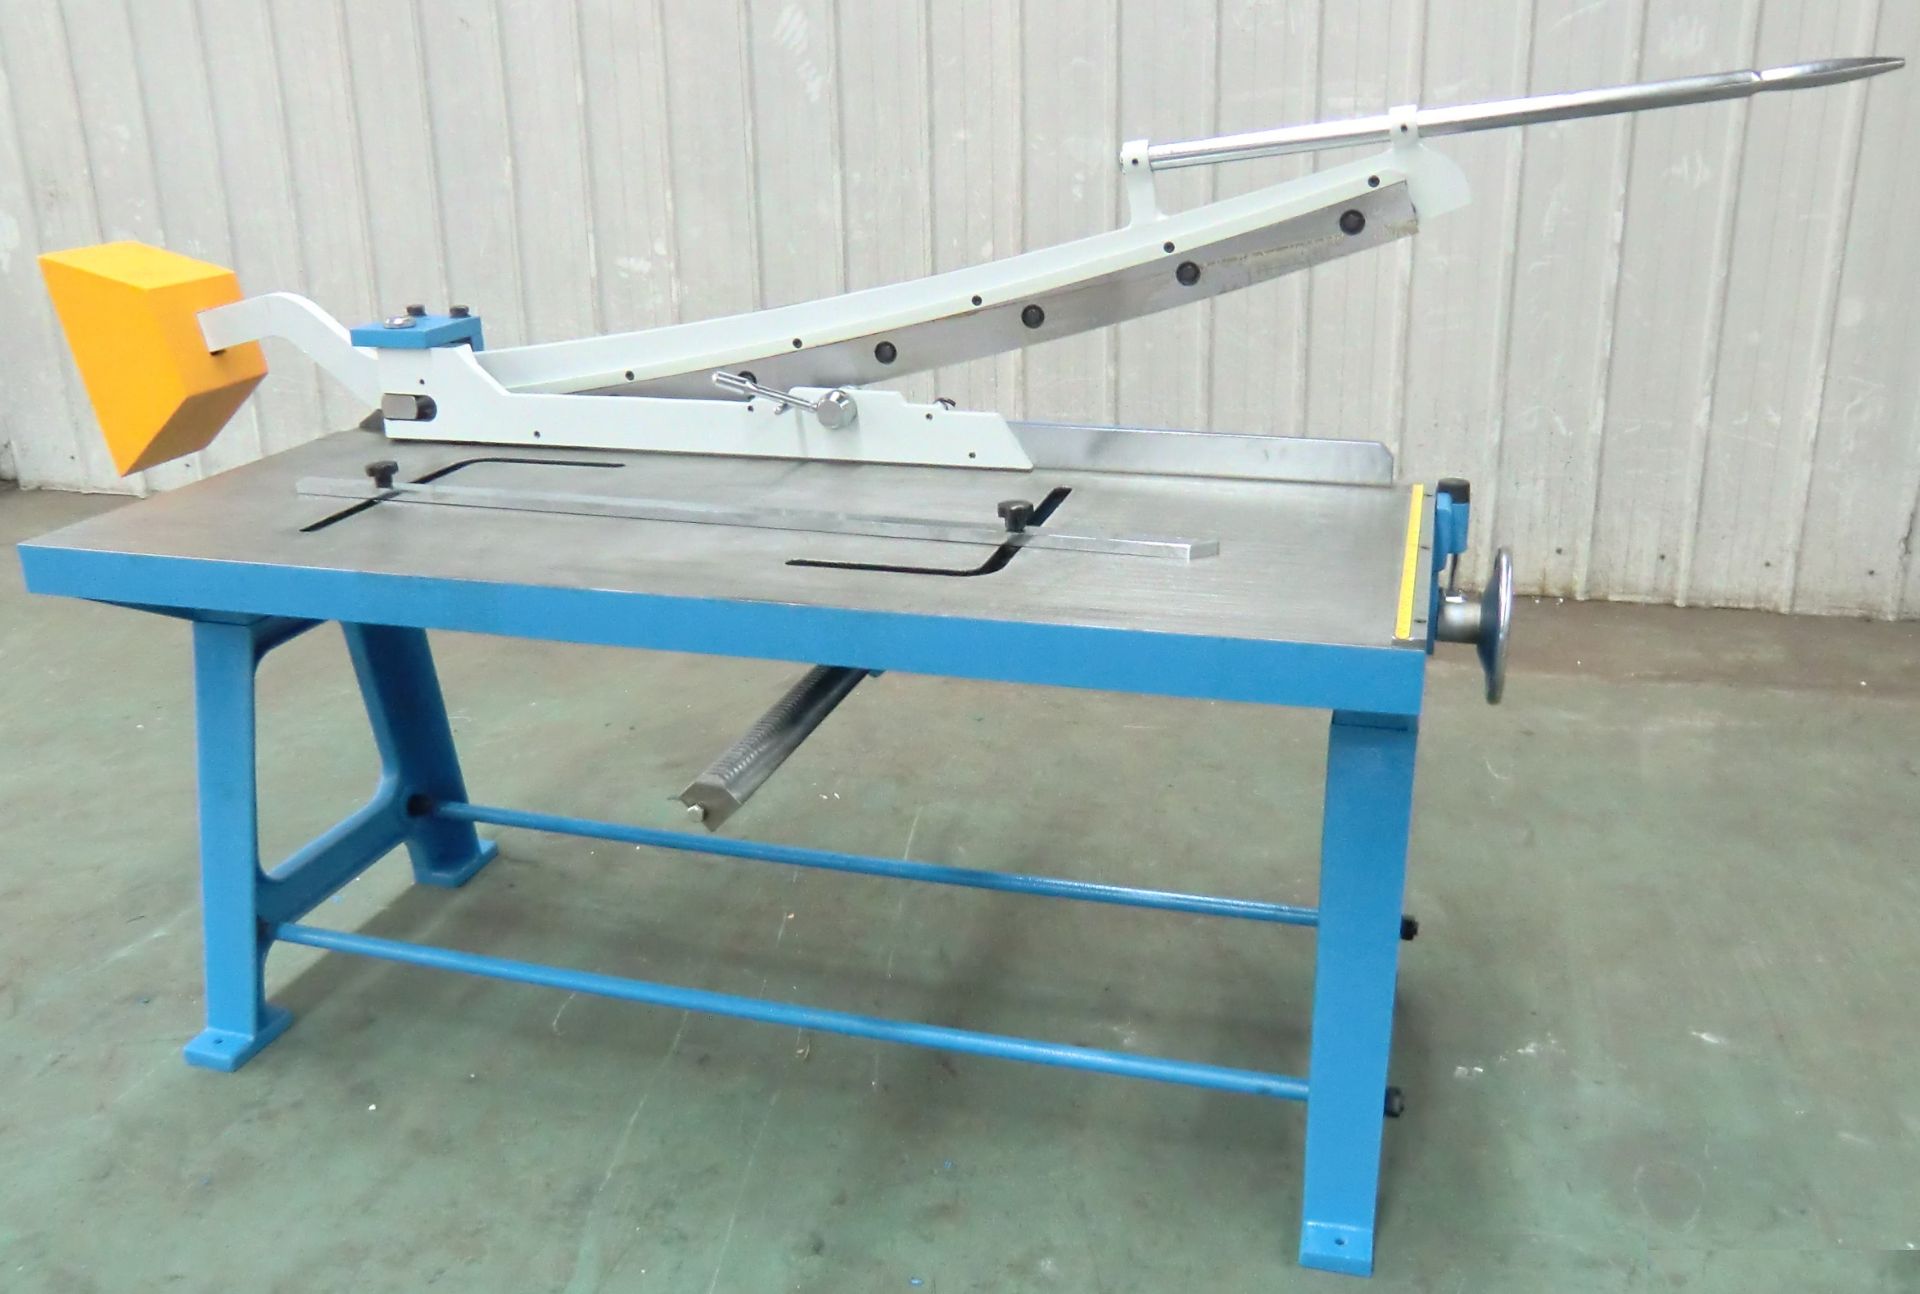 Guillotine Shear 49.25" WIDE, Max shear thickness 20 Gauge, Cast iron bed